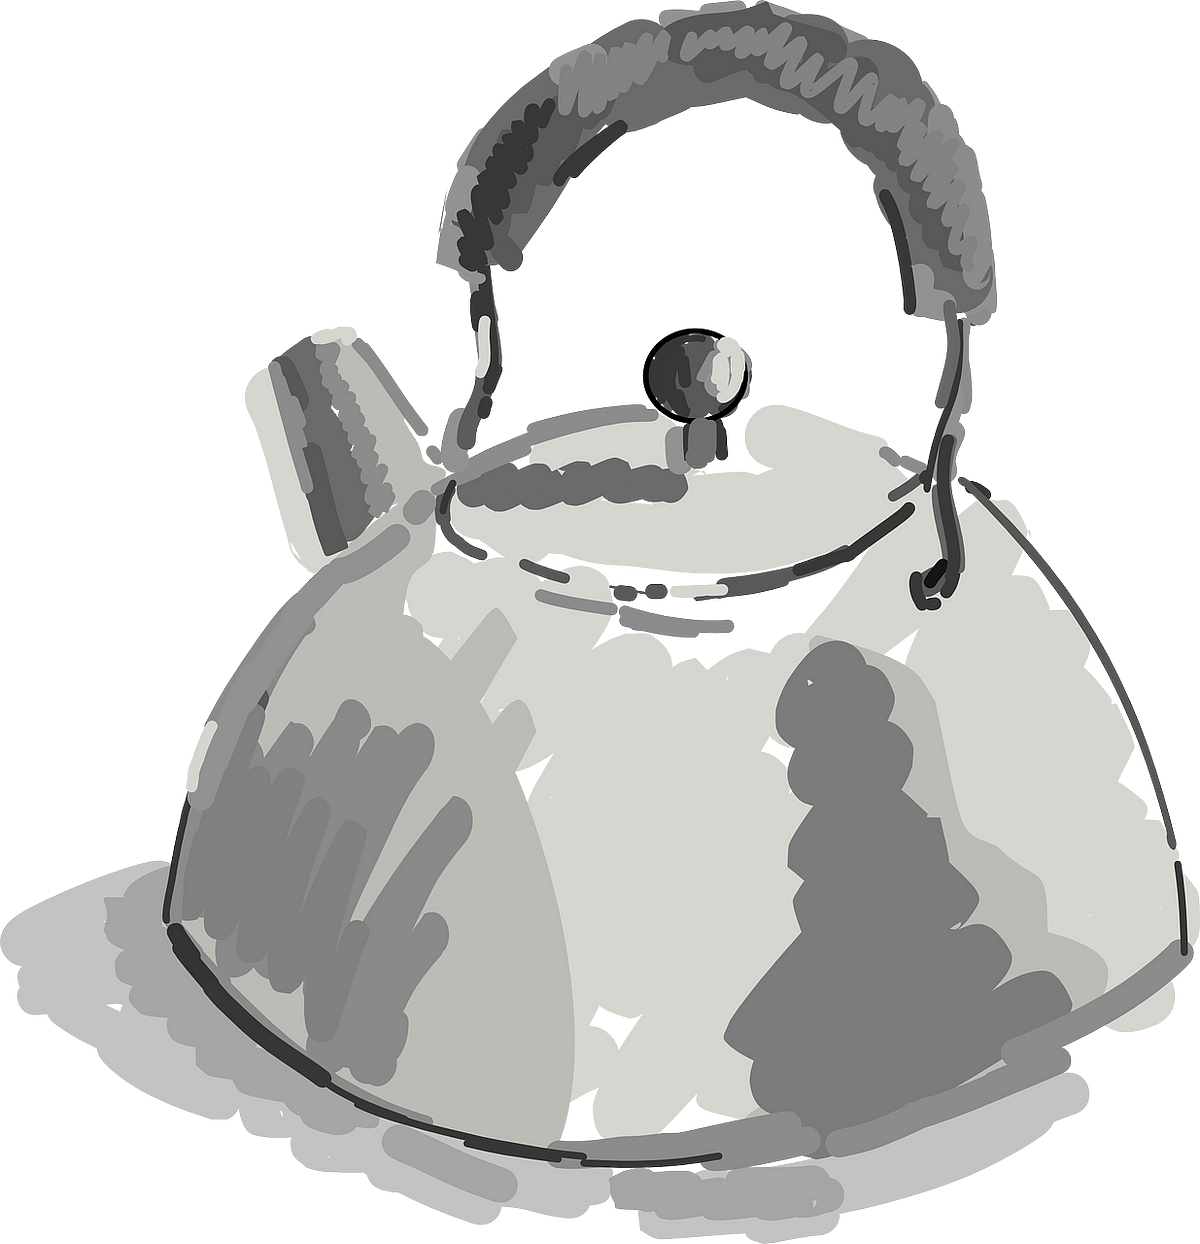 Boiling pot - Openclipart